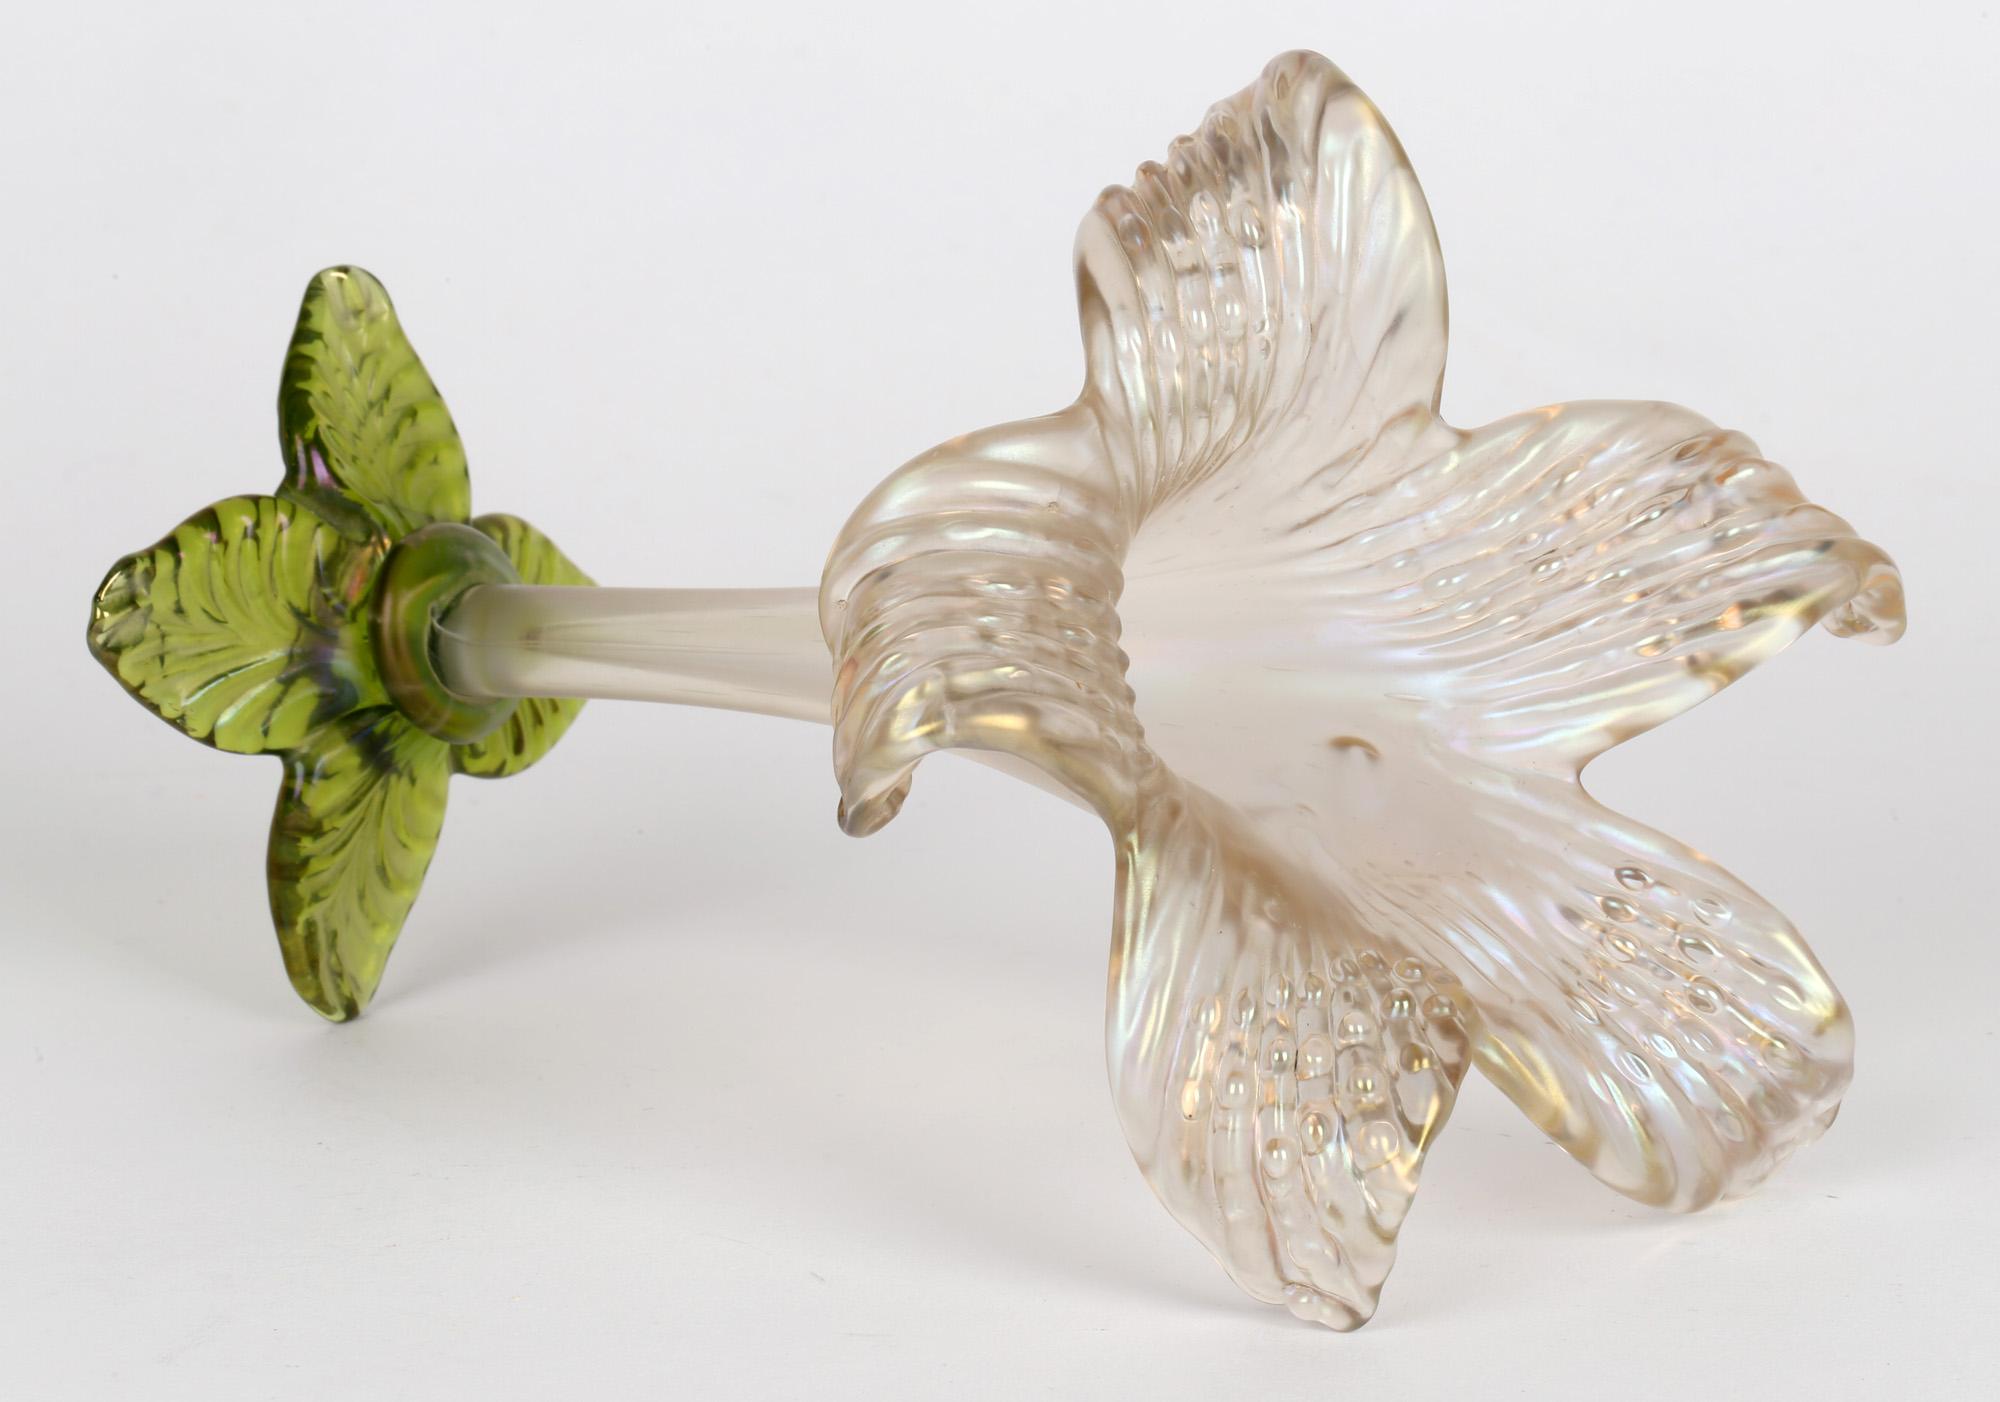 An unusual and scarce Bohemian Art Nouveau iridescent solifleur glass flower shaped vase attributed to Wilhelm Kralik Sohne and dating from around 1900. The finely made vase stands raised on a four leaf shaped foot in green iridescent glass with a